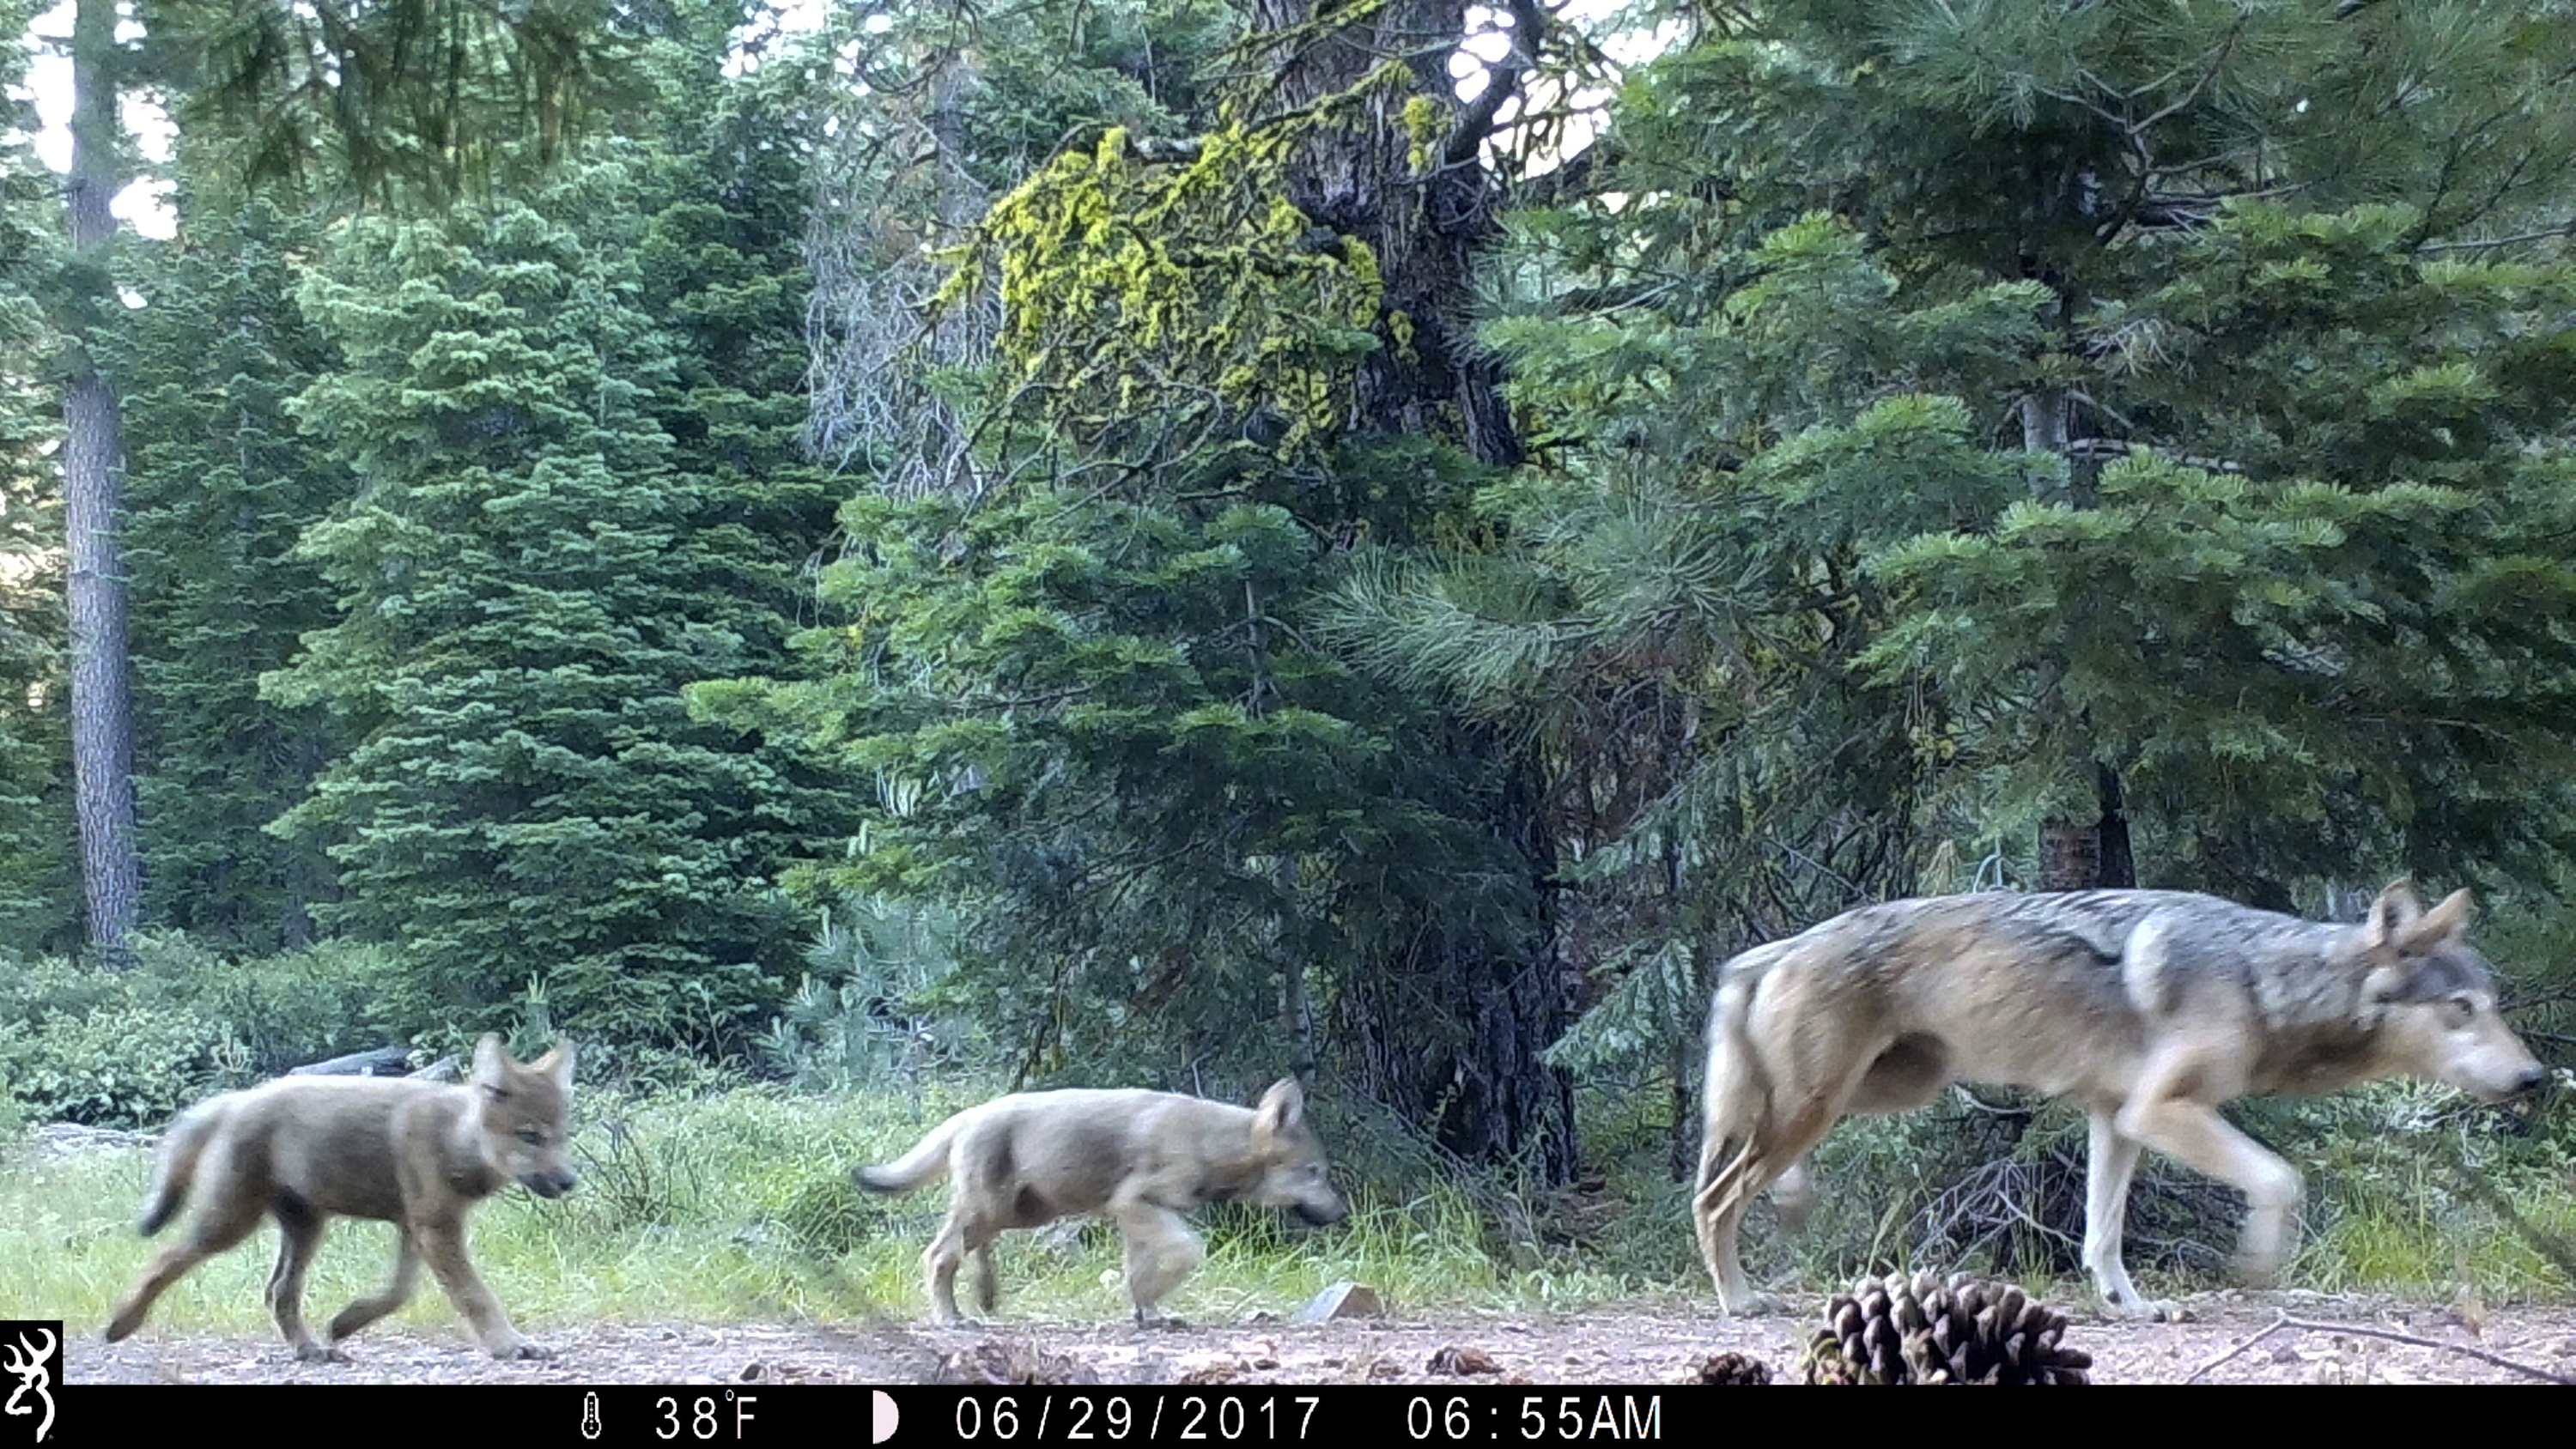 FILE - This June 29, 2017, file remote camera image provided by the U.S. Forest Service shows a female gray wolf and two of the three pups born in 2017 in the wilds of Lassen National Forest in Northern California. The Trump administration plans to lift endangered species protections for gray wolves across most of the nation by the end of 2020, the director of the U.S. Fish and Wildlife Service said Monday, Aug. 31, 2020.